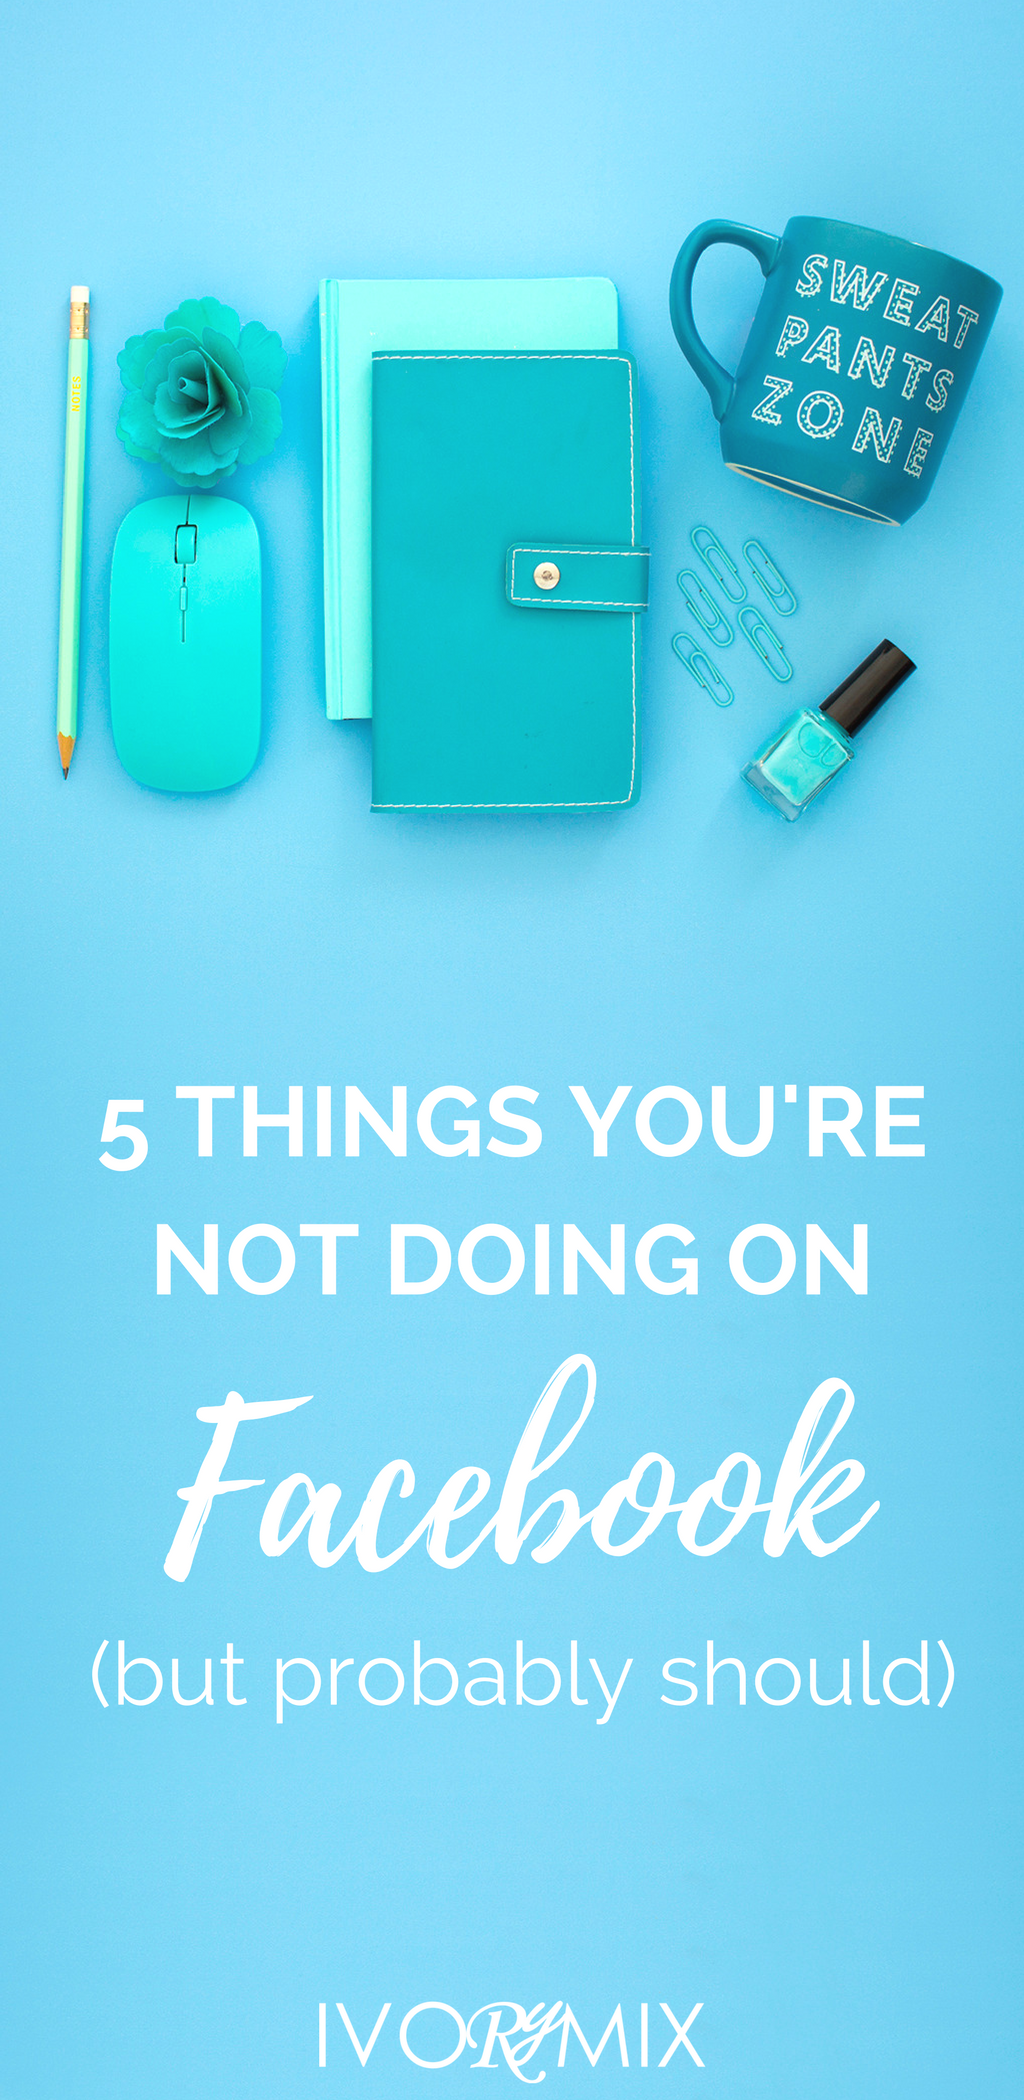 5 things you're not doing on facebook but should be